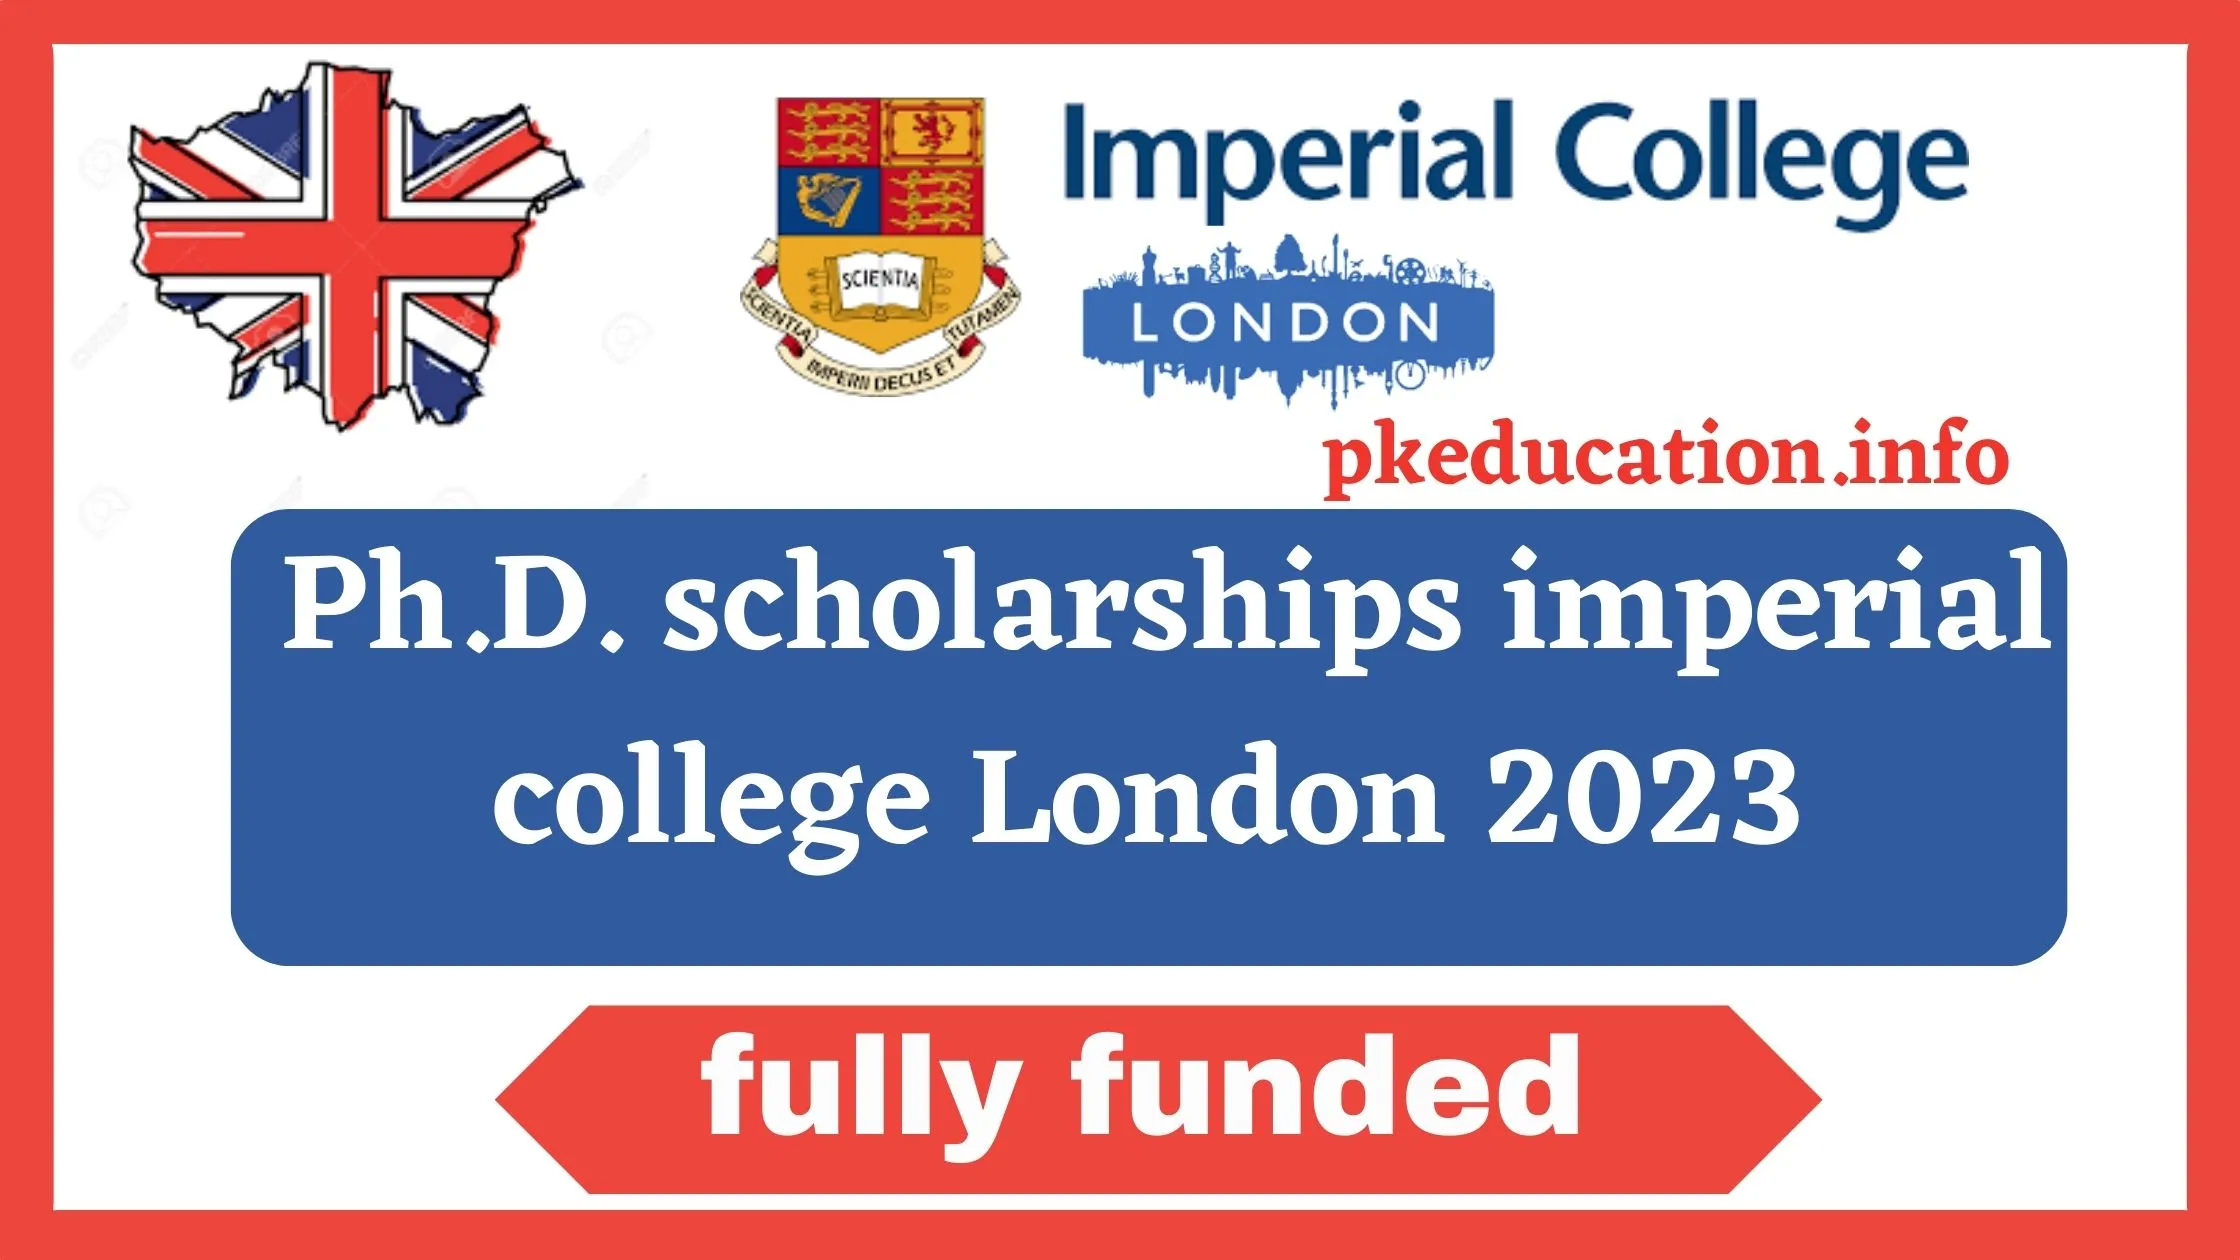 Ph.D. scholarships imperial college London 2023(fully funded)